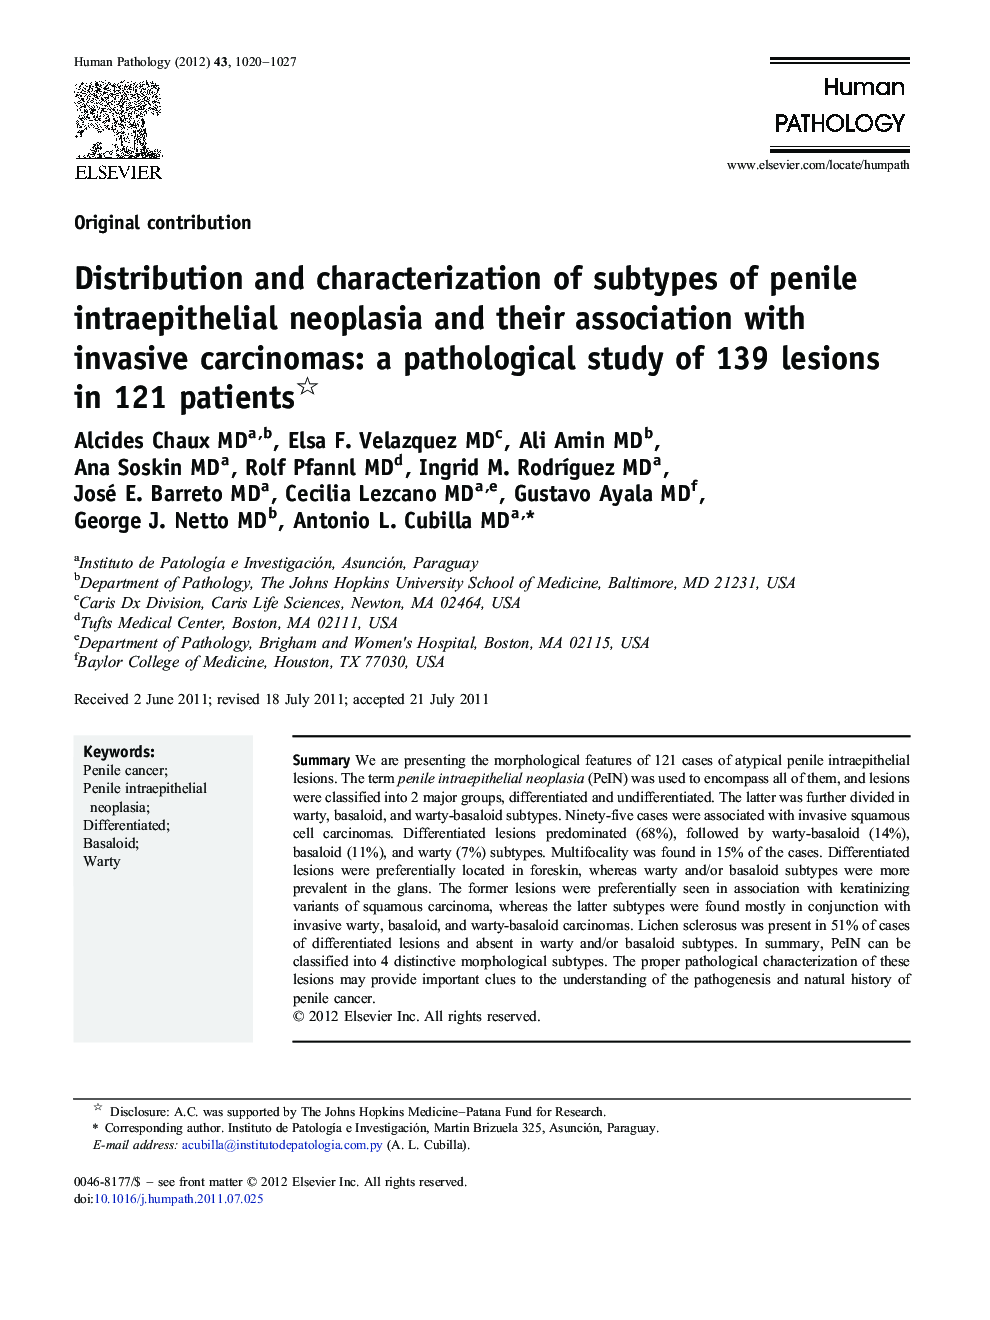 Distribution and characterization of subtypes of penile intraepithelial neoplasia and their association with invasive carcinomas: a pathological study of 139 lesions in 121 patients 